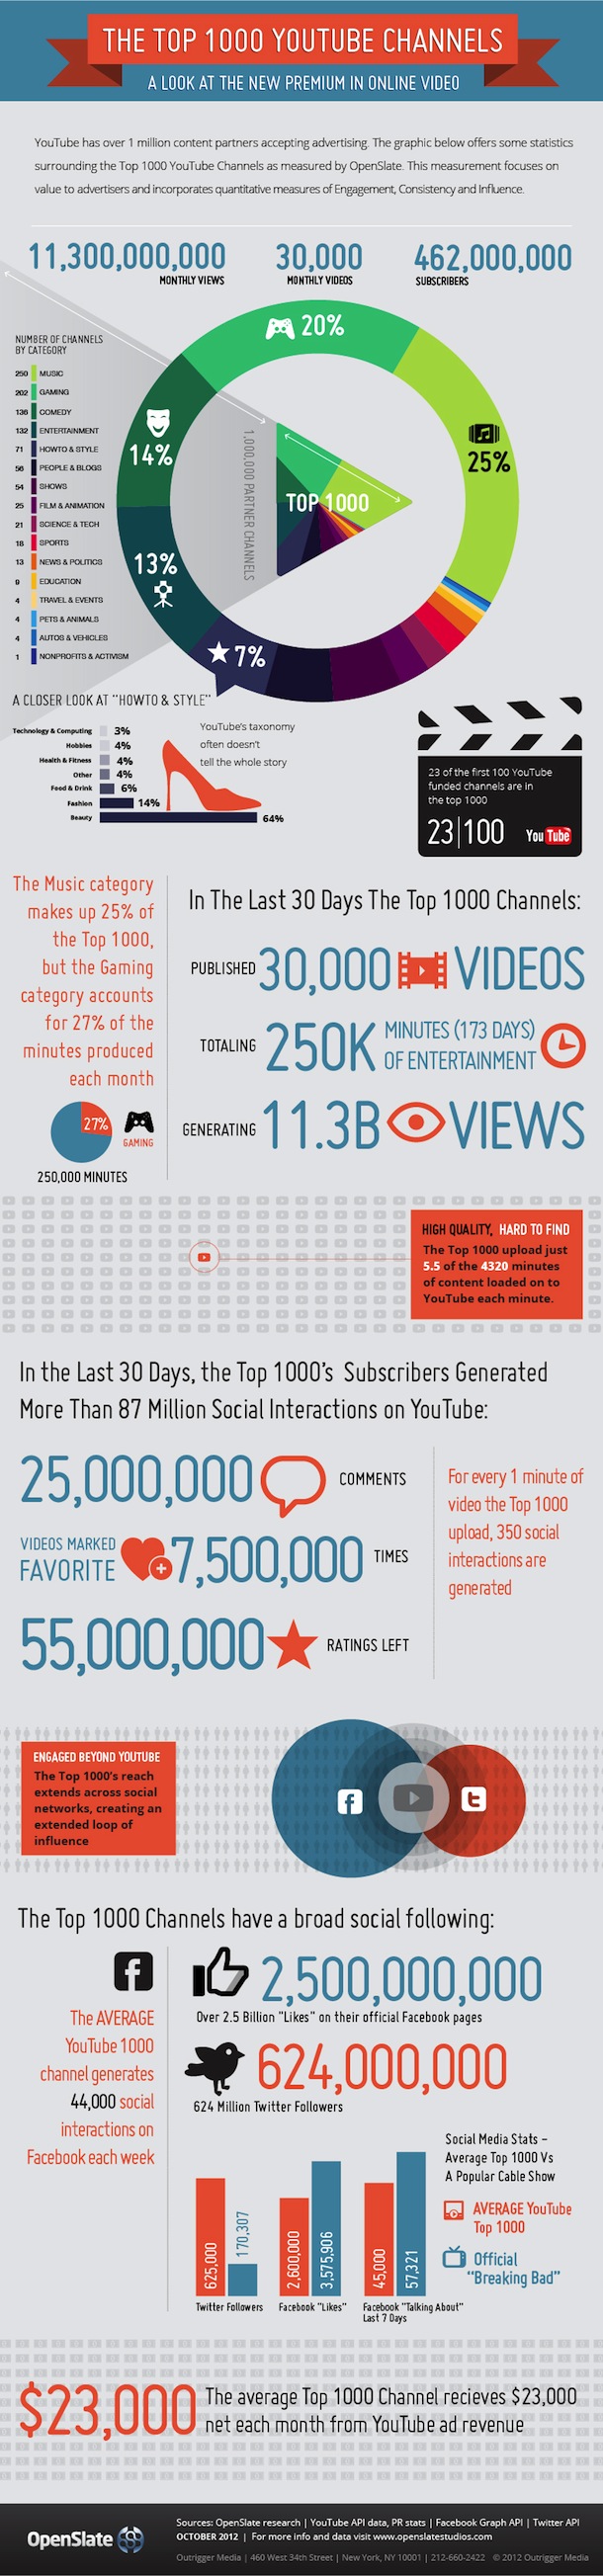 youtube-top-1000-channels